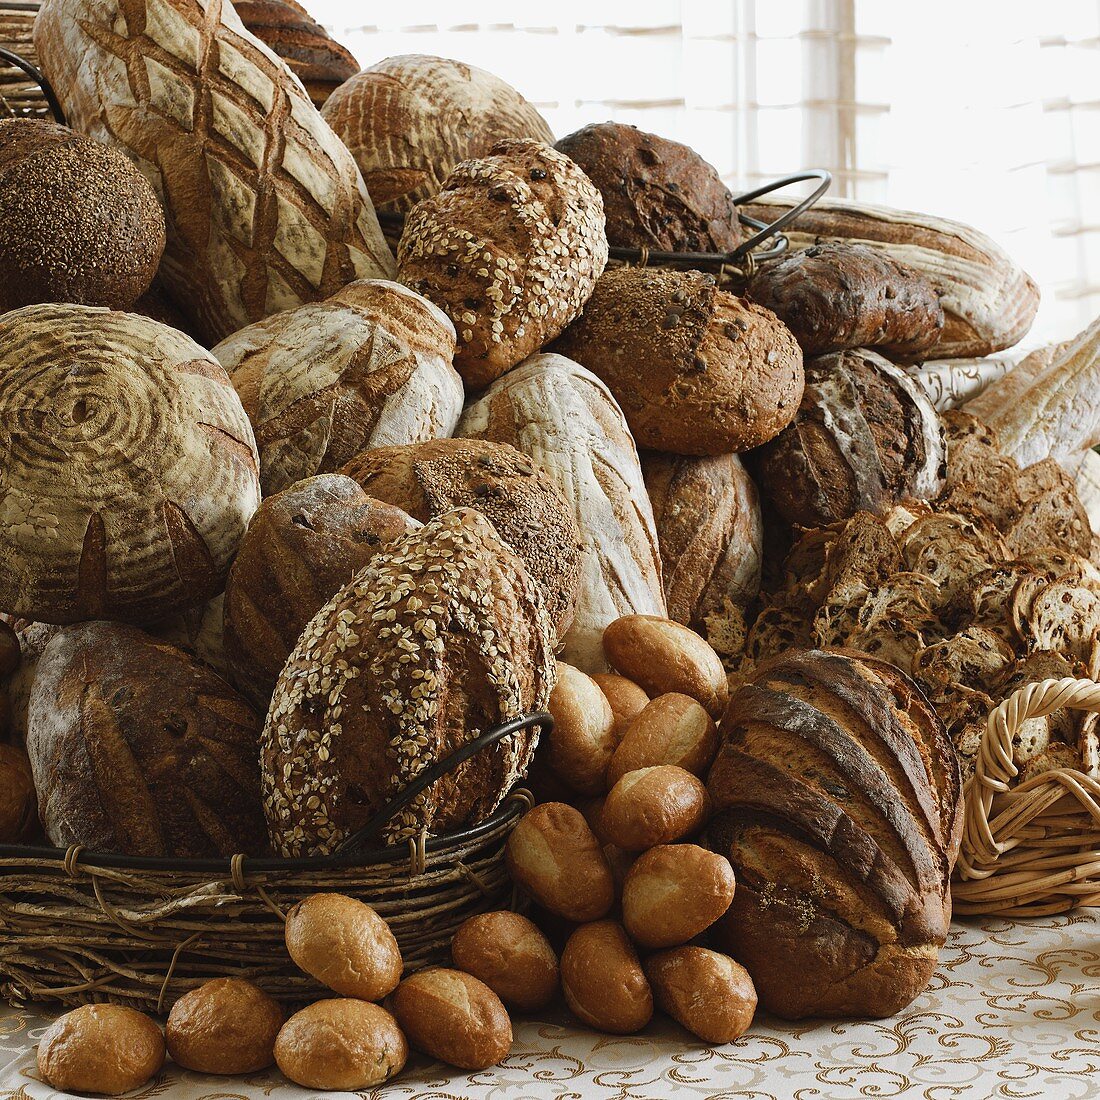 Various Breads in and Next to Baskets